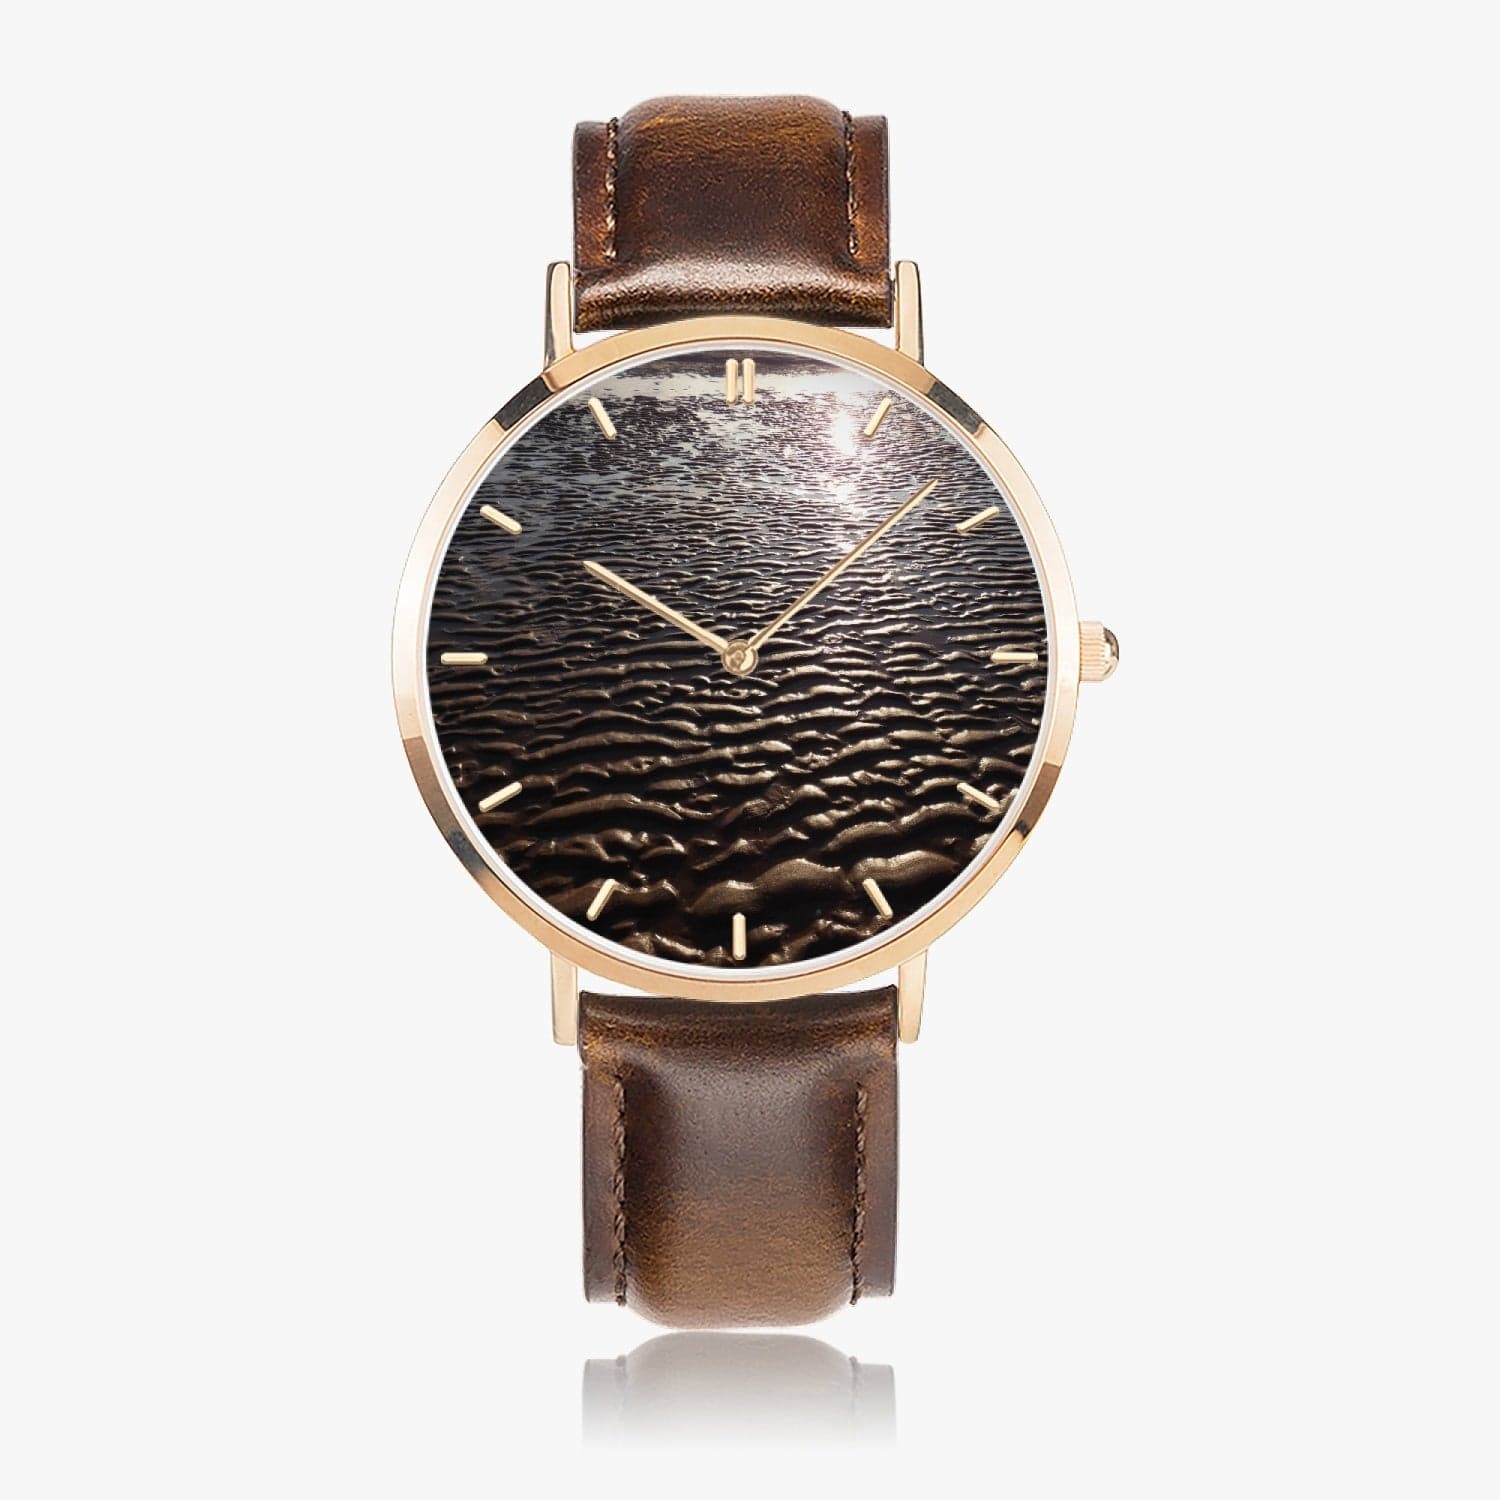 Sand relief, Hot Selling Ultra-Thin Leather Strap Quartz Watch (Rose Gold With Indicators)  Designer watch by Sensus Studio